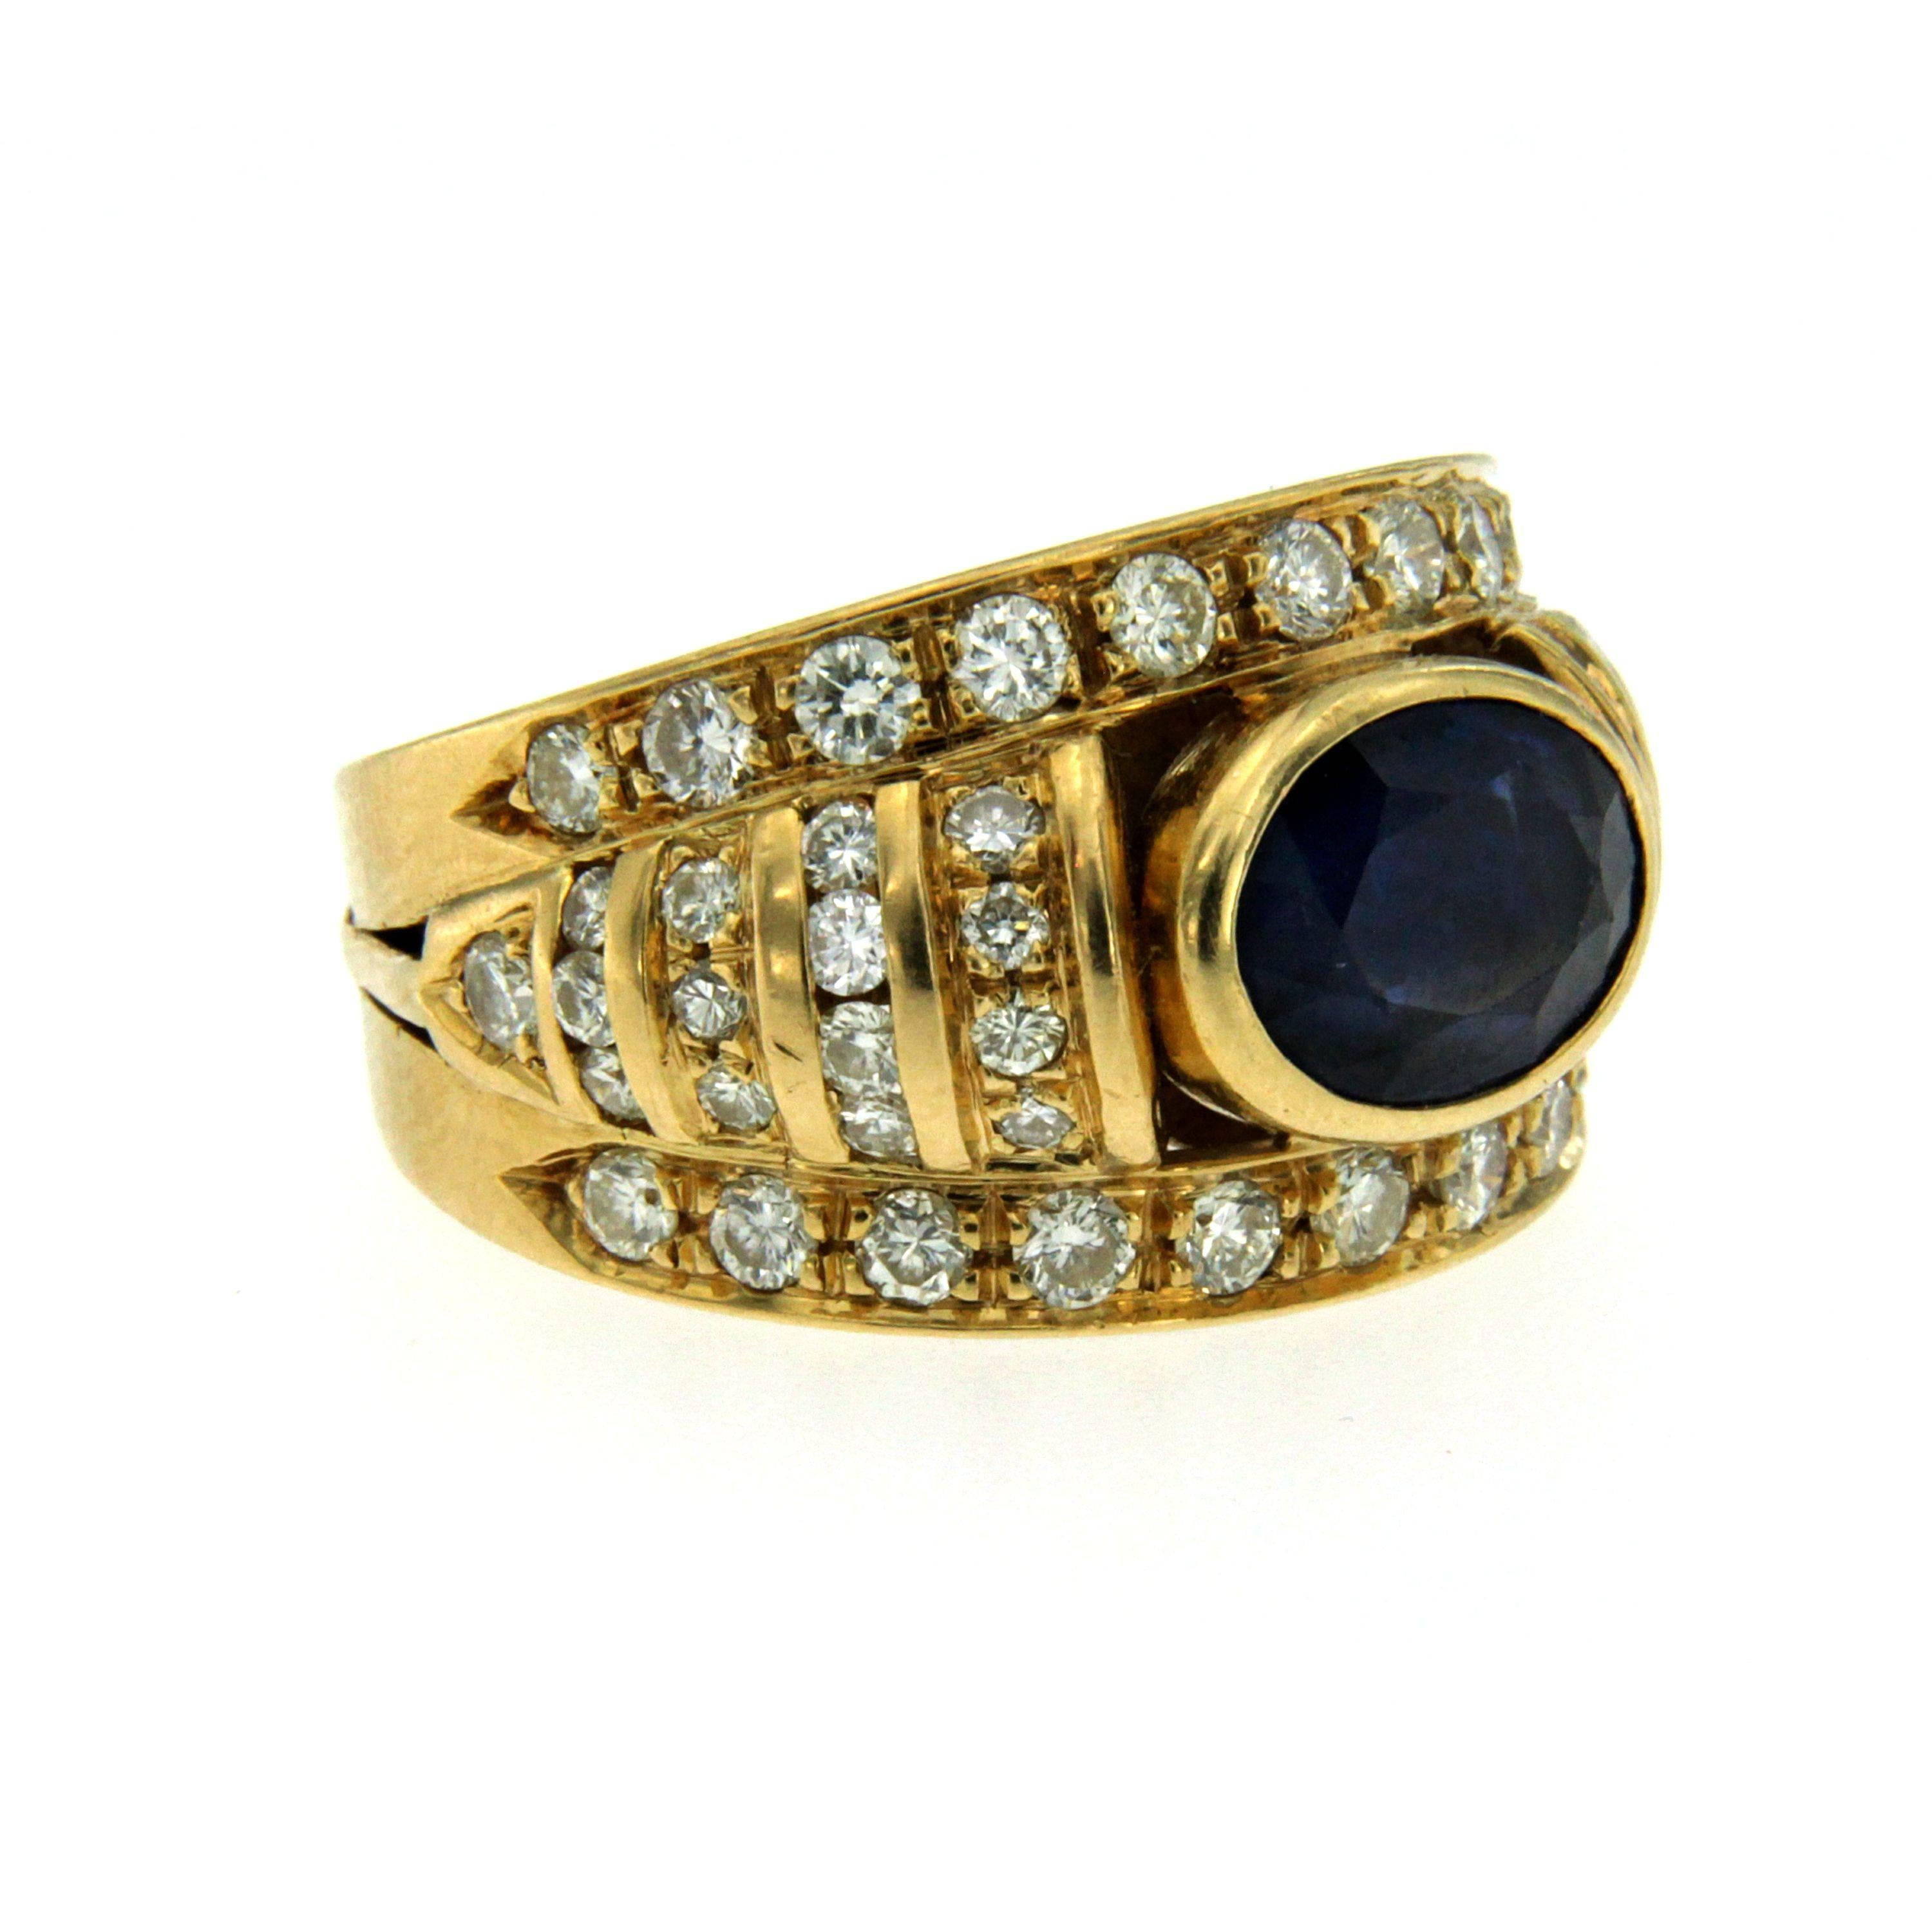 Beautiful cocktail ring handmade in 18k yellow Gold showcasing a Natural Sapphire in the center weighing approx. 3.00 carat and surrounded by 2.00 carat of round brilliant-cut diamonds graded G color. Circa 1950

CONDITION: Pre-owned - Excellent